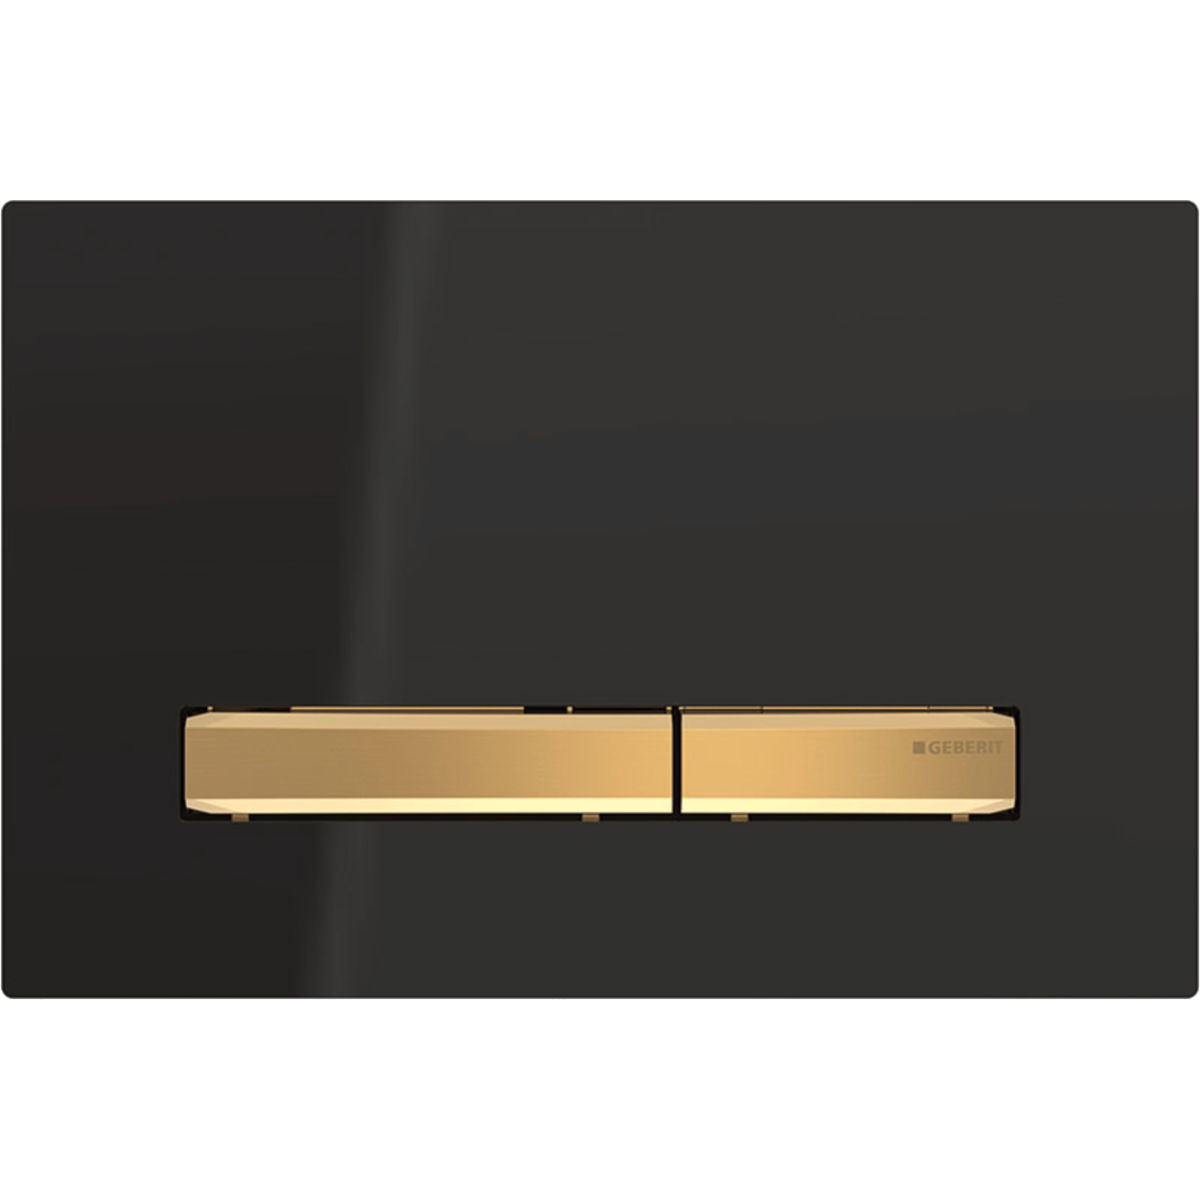 Geberit 115.672.DW.2 Actuator Plate Sigma50 for Dual Flush, Metal Colour Brass - Base Plate and Buttons: Brass/Cover Plate: Black